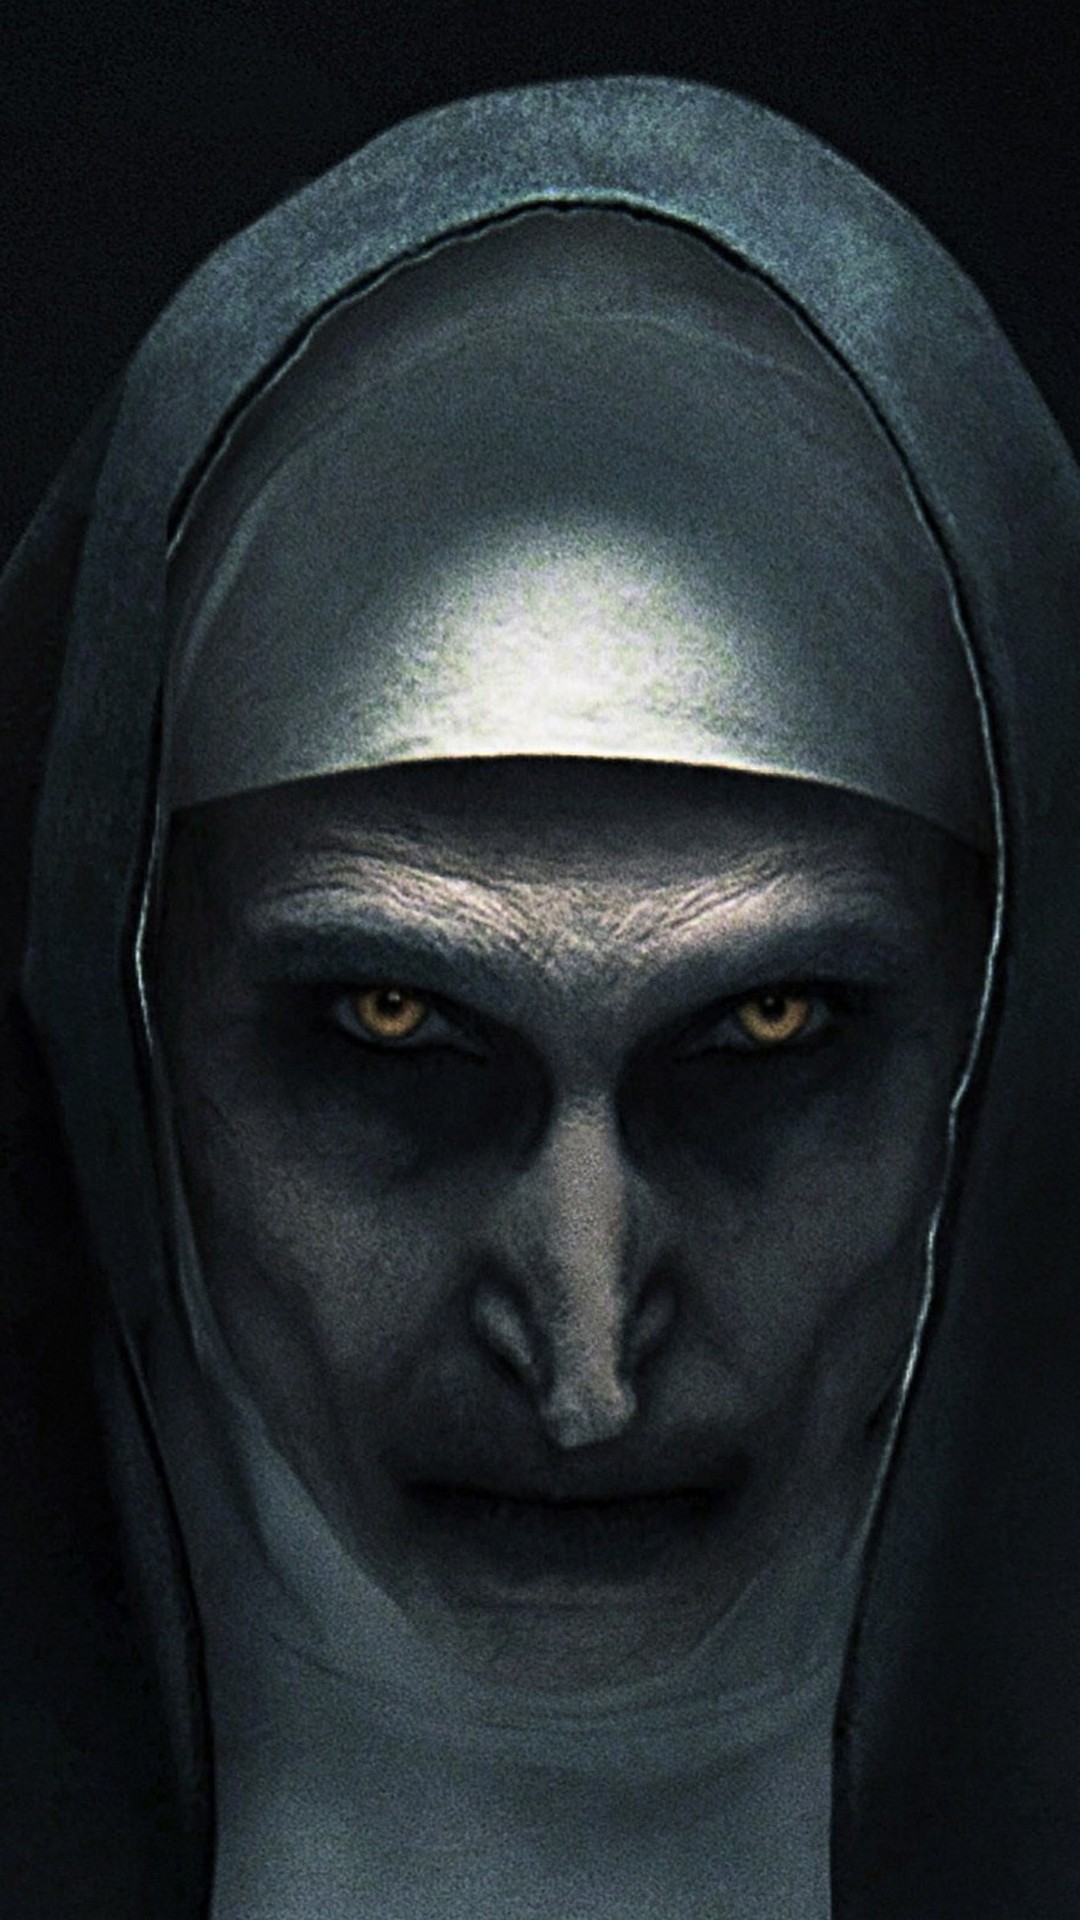 Wallpaper The Nun iPhone with image resolution 1080x1920 pixel. You can make this wallpaper for your iPhone 5, 6, 7, 8, X backgrounds, Mobile Screensaver, or iPad Lock Screen